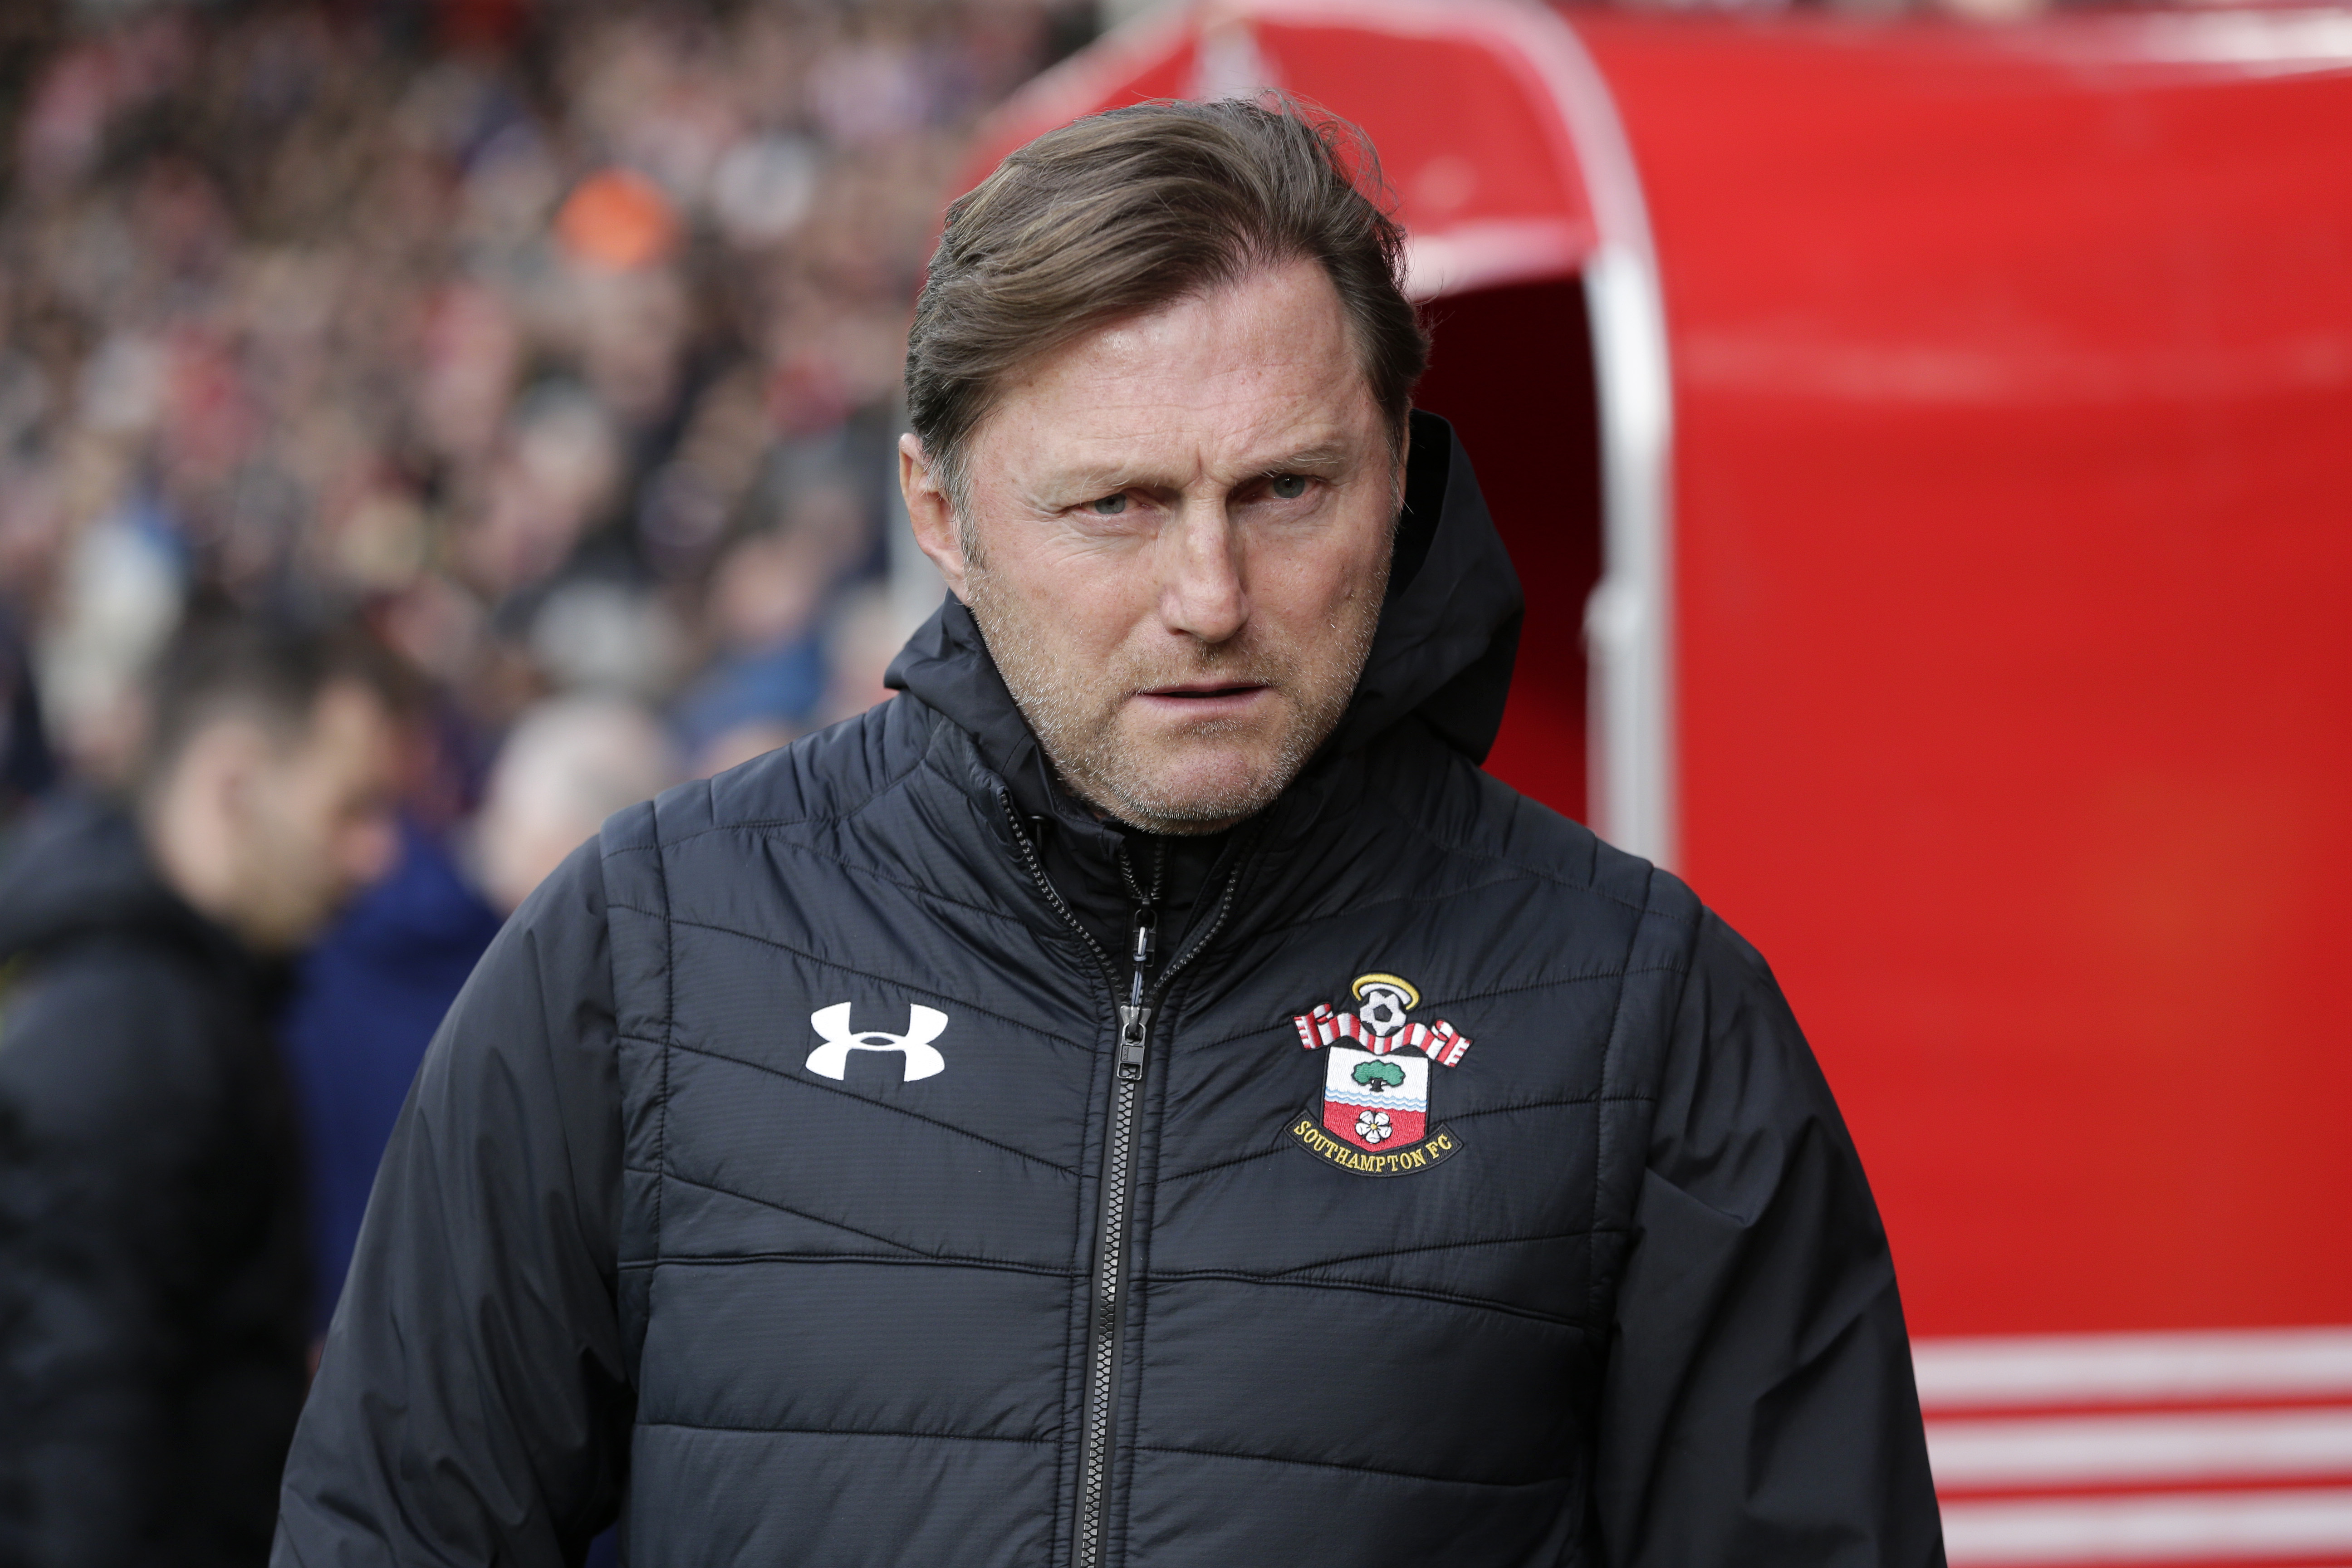 20190329-The18-Image-Southampton-Coach-GettyImages-1096531550.jpg